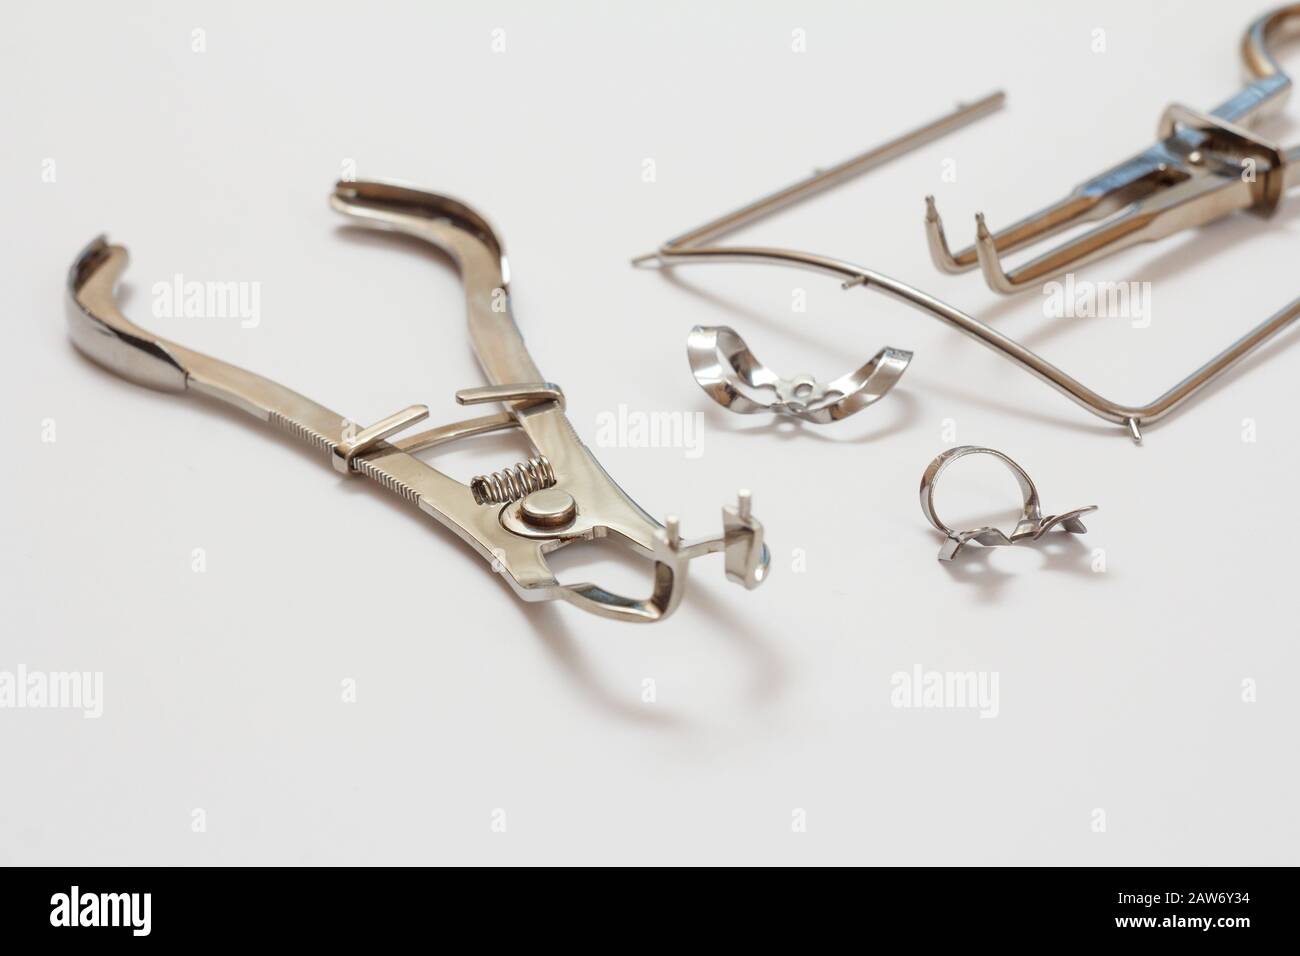 Metal instrument for dental treatment. Dental tongs, clasps and cofferdam frame on white background. Medical tools. Shallow depth of field. Stock Photo